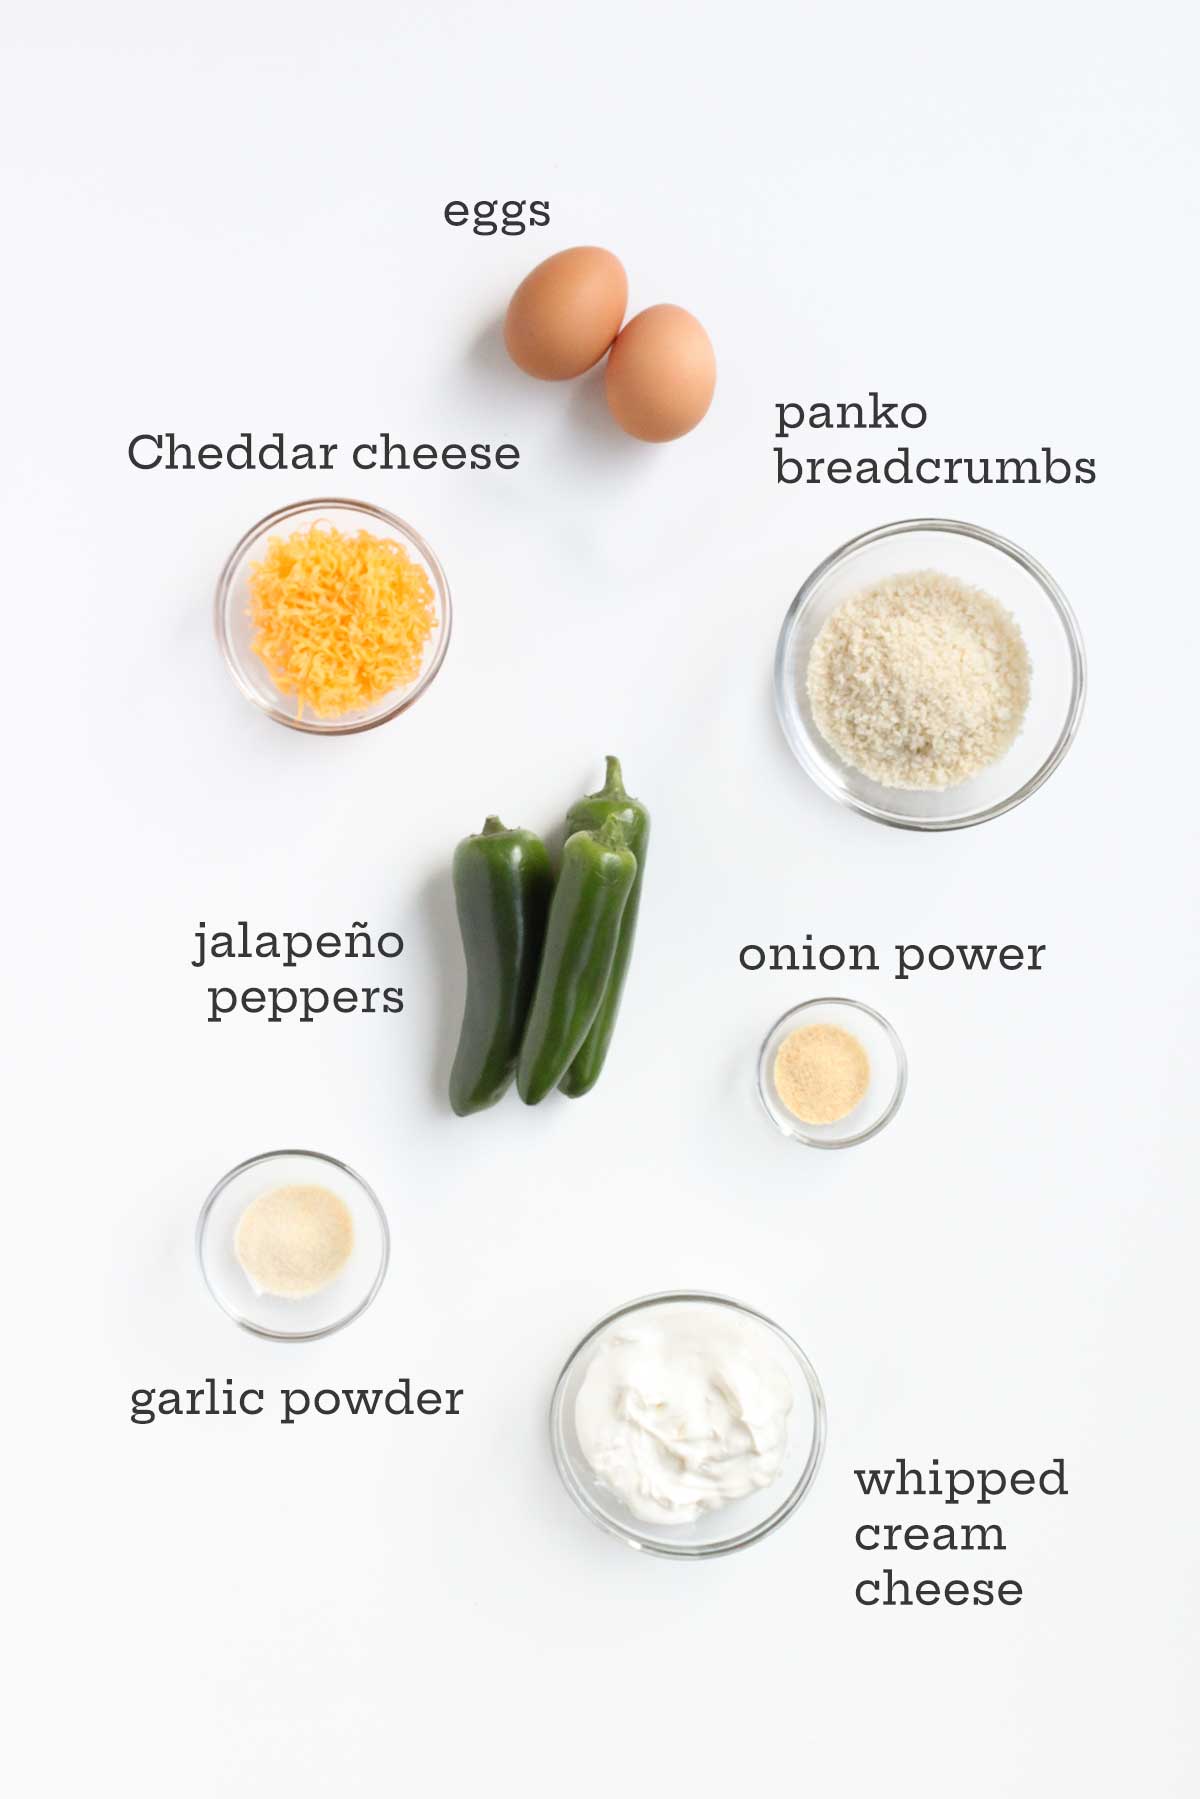 Ingredients for jalapeno poppers -- eggs, bread crumbs, Cheddar, jalapenos, onion and garlic powders, and whipped cream cheese.